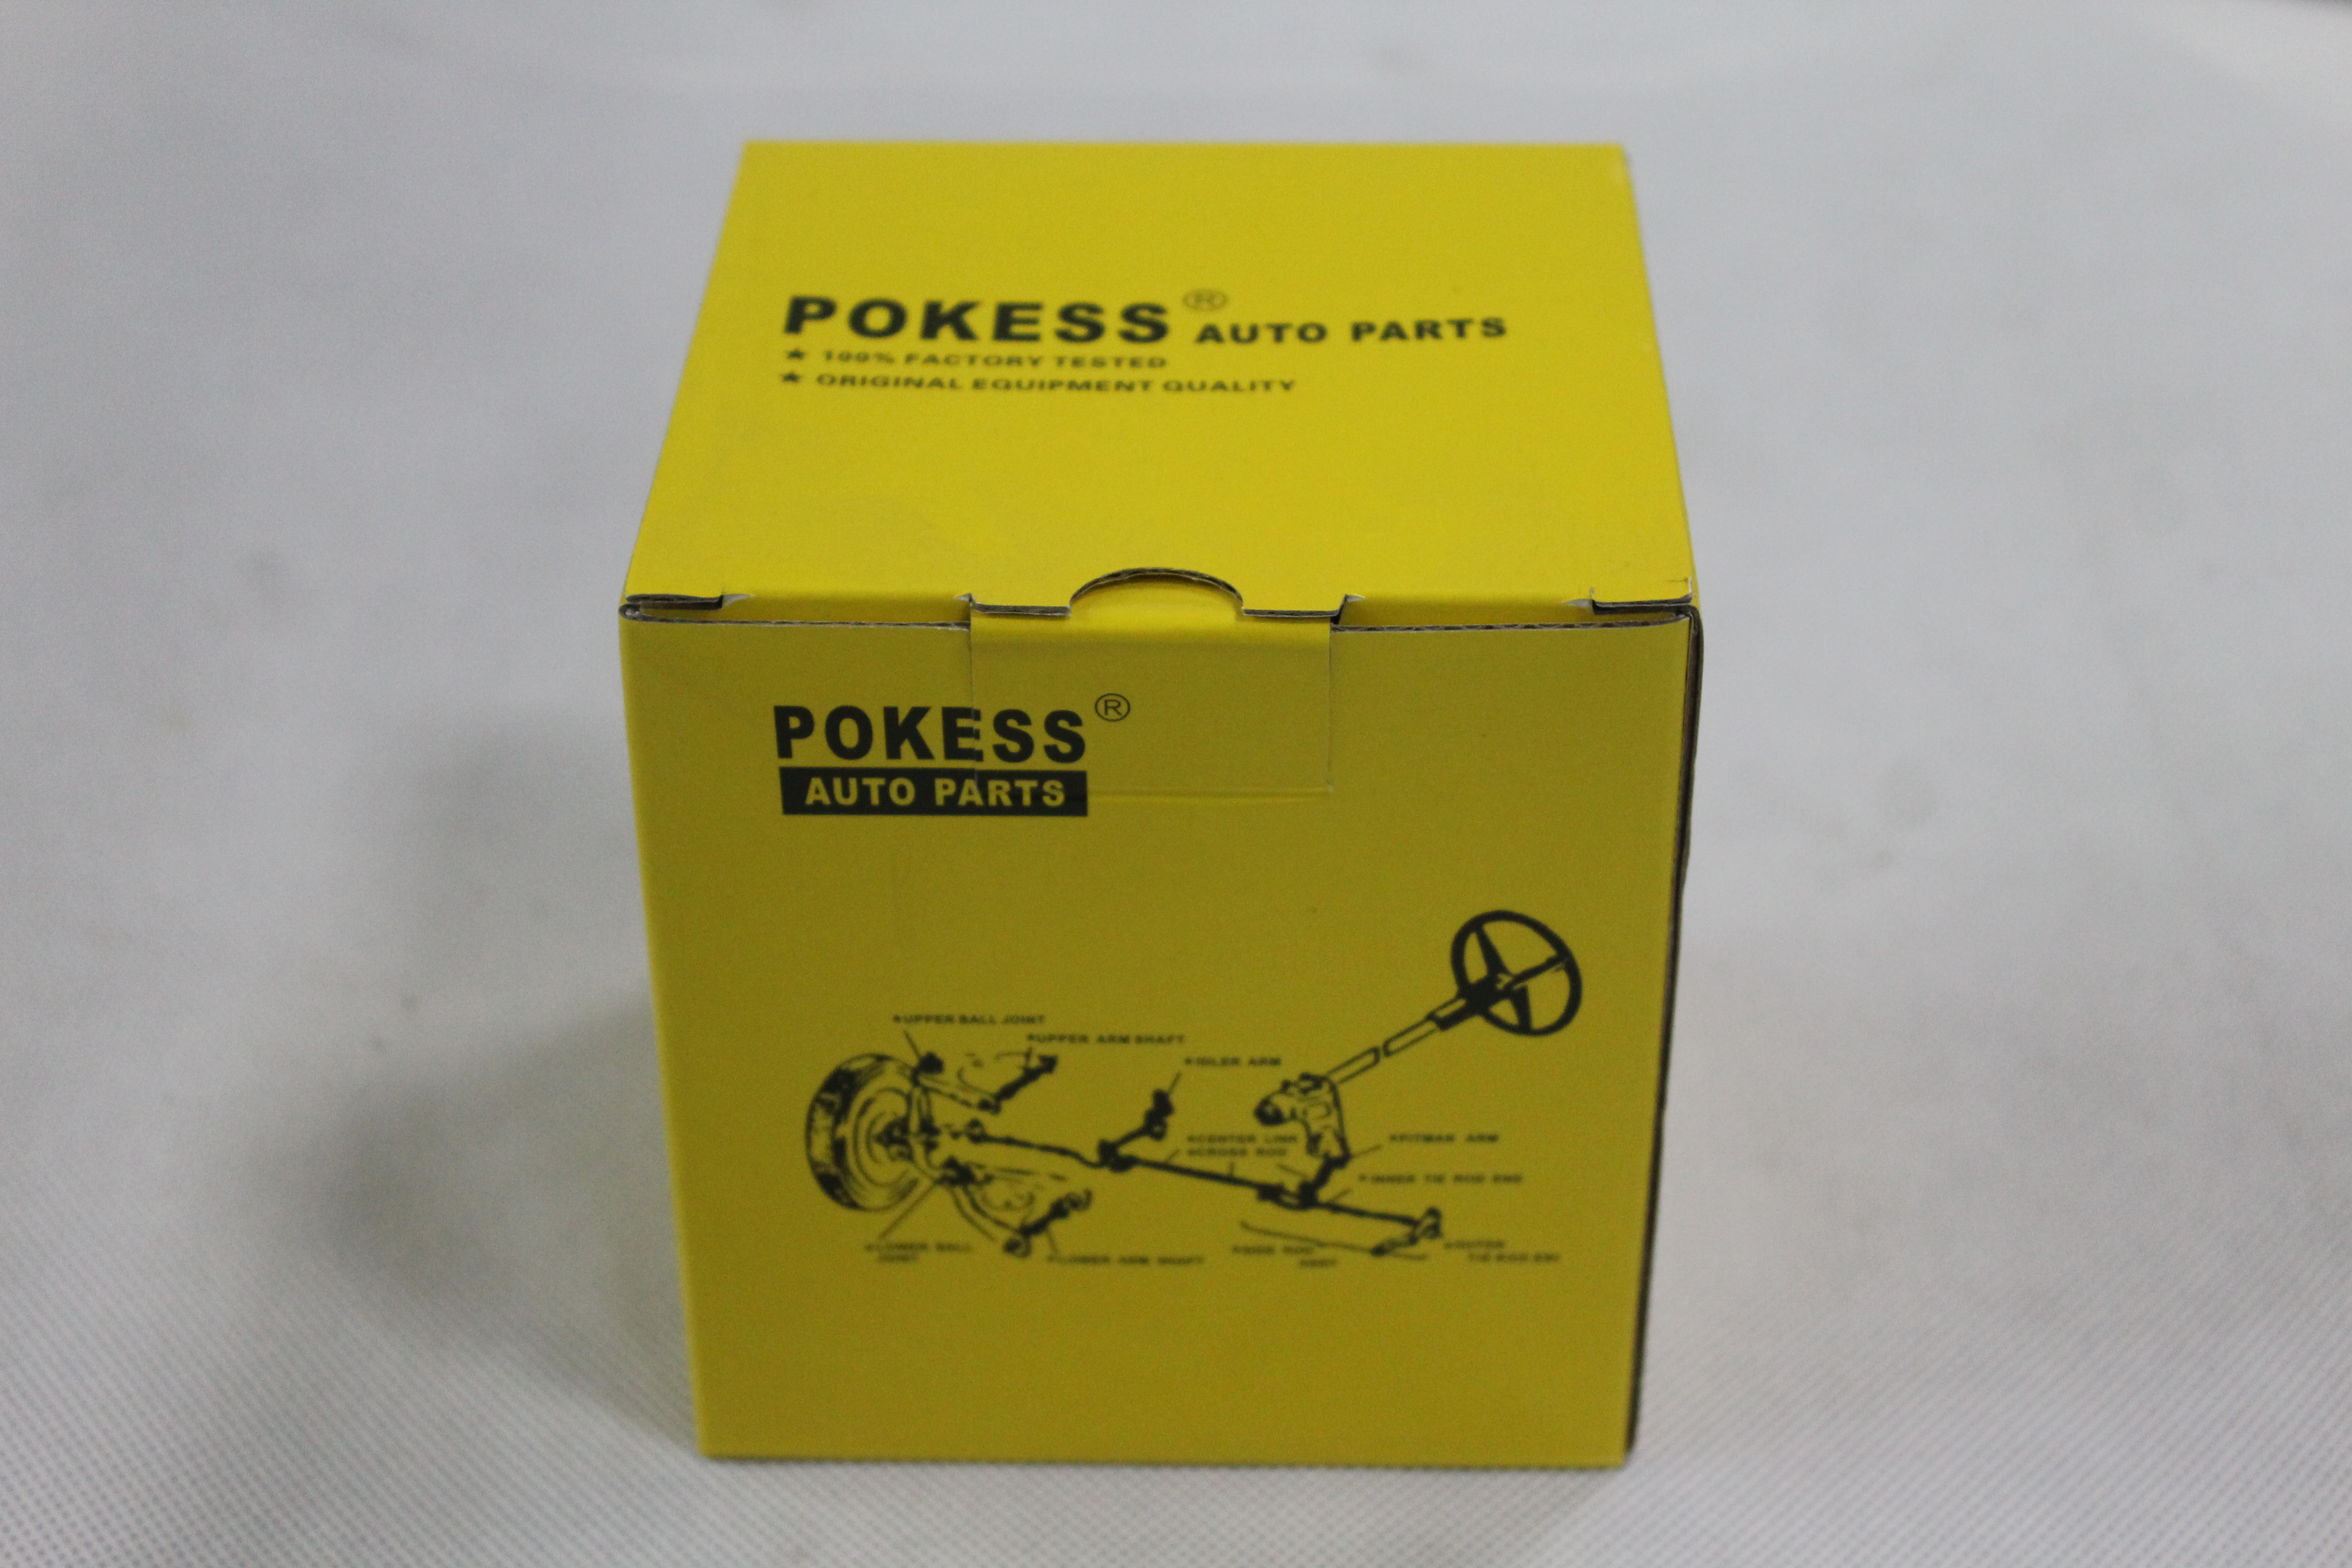 Our excellent product: POKESS(图4)